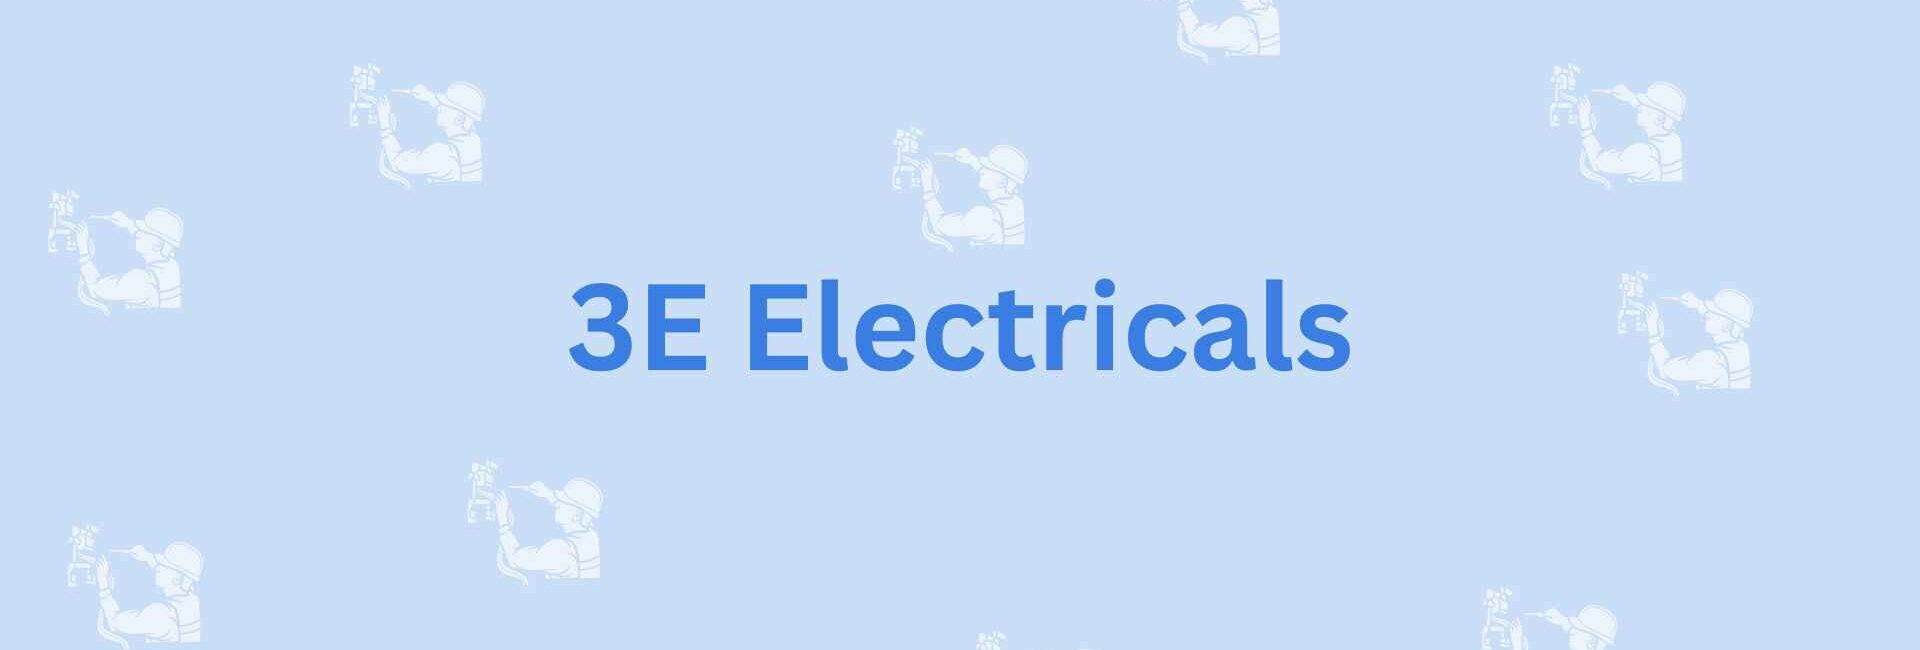 3E Electricals- Electrical Safety Inspections In Noida